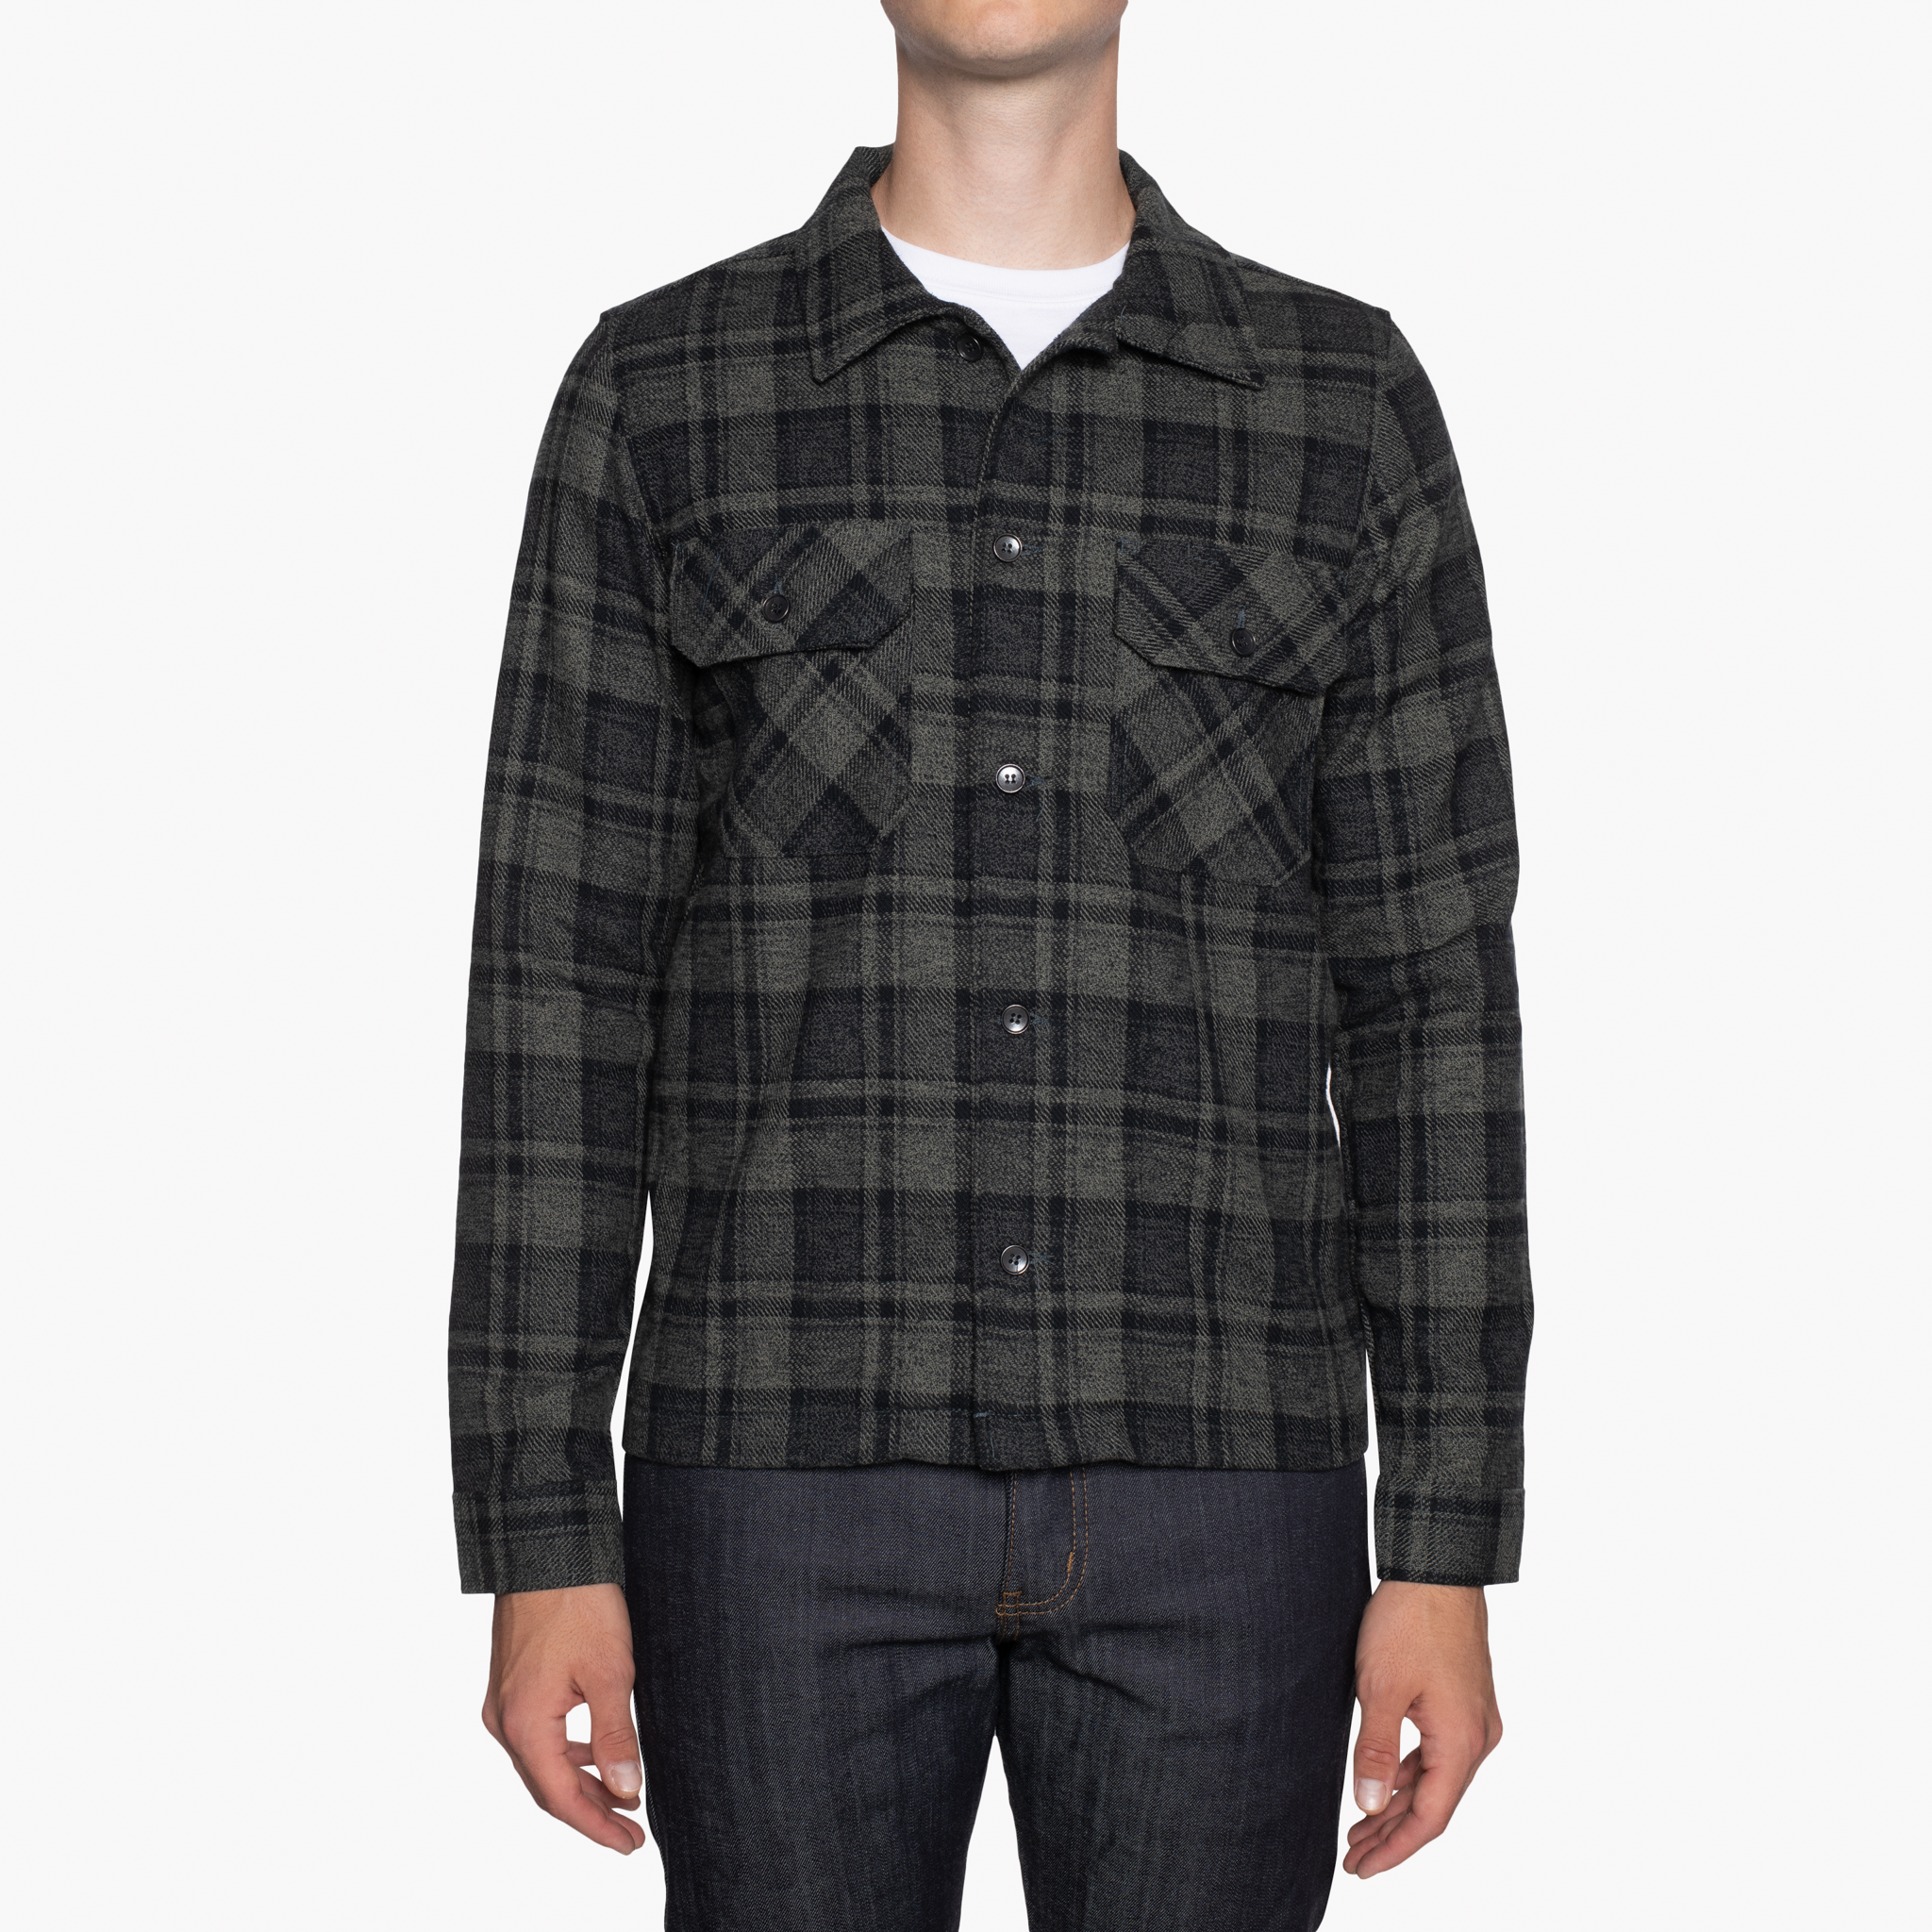  Work Shirt - Heavy Vintage Flannel - Charcoal - front 